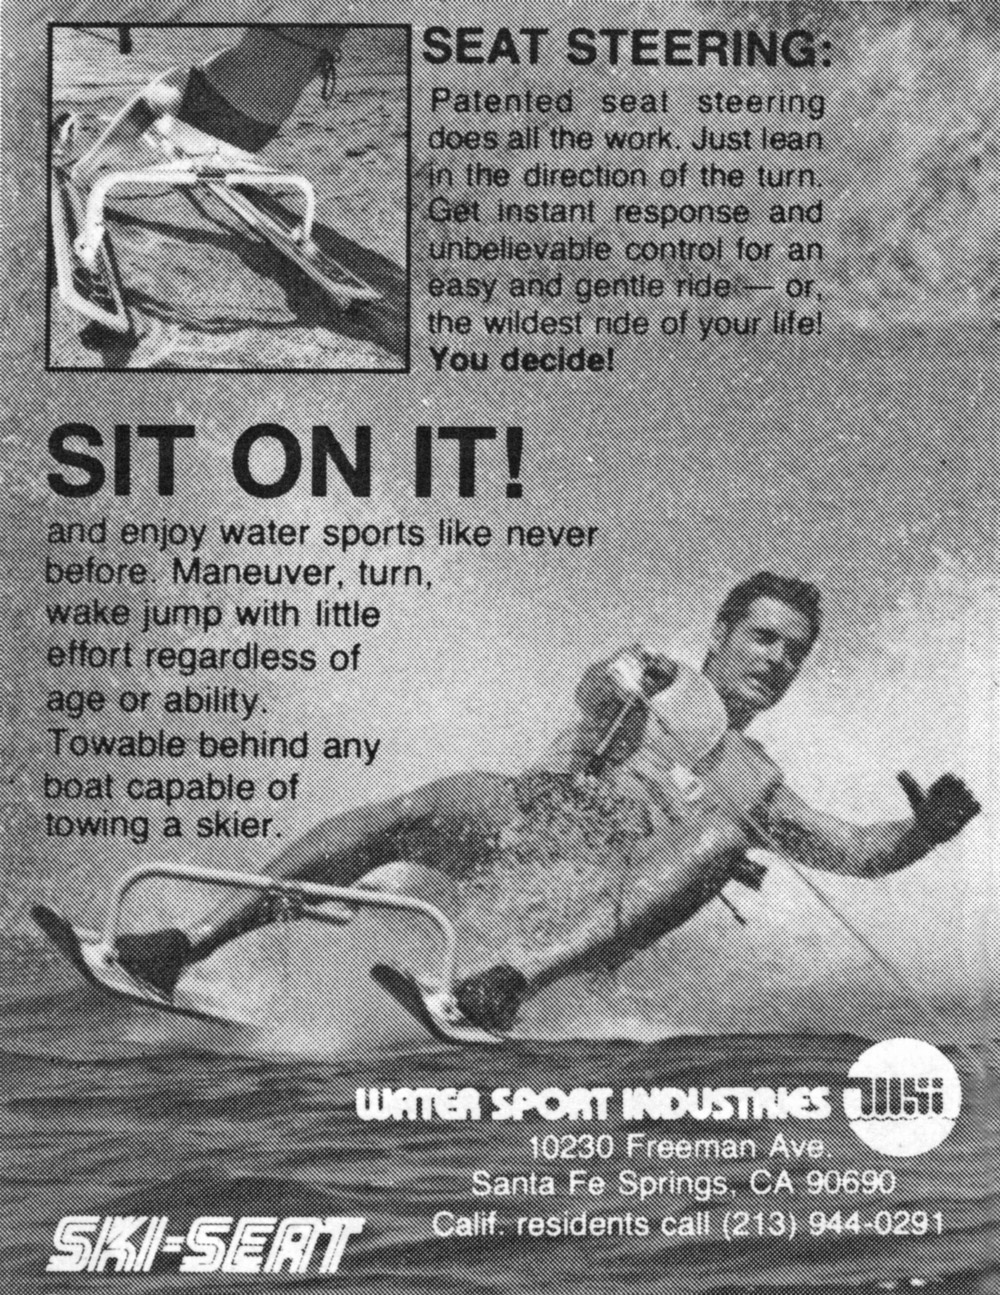 adventures-water-skiing-hydrofoiling-1981-ski-seat-ad